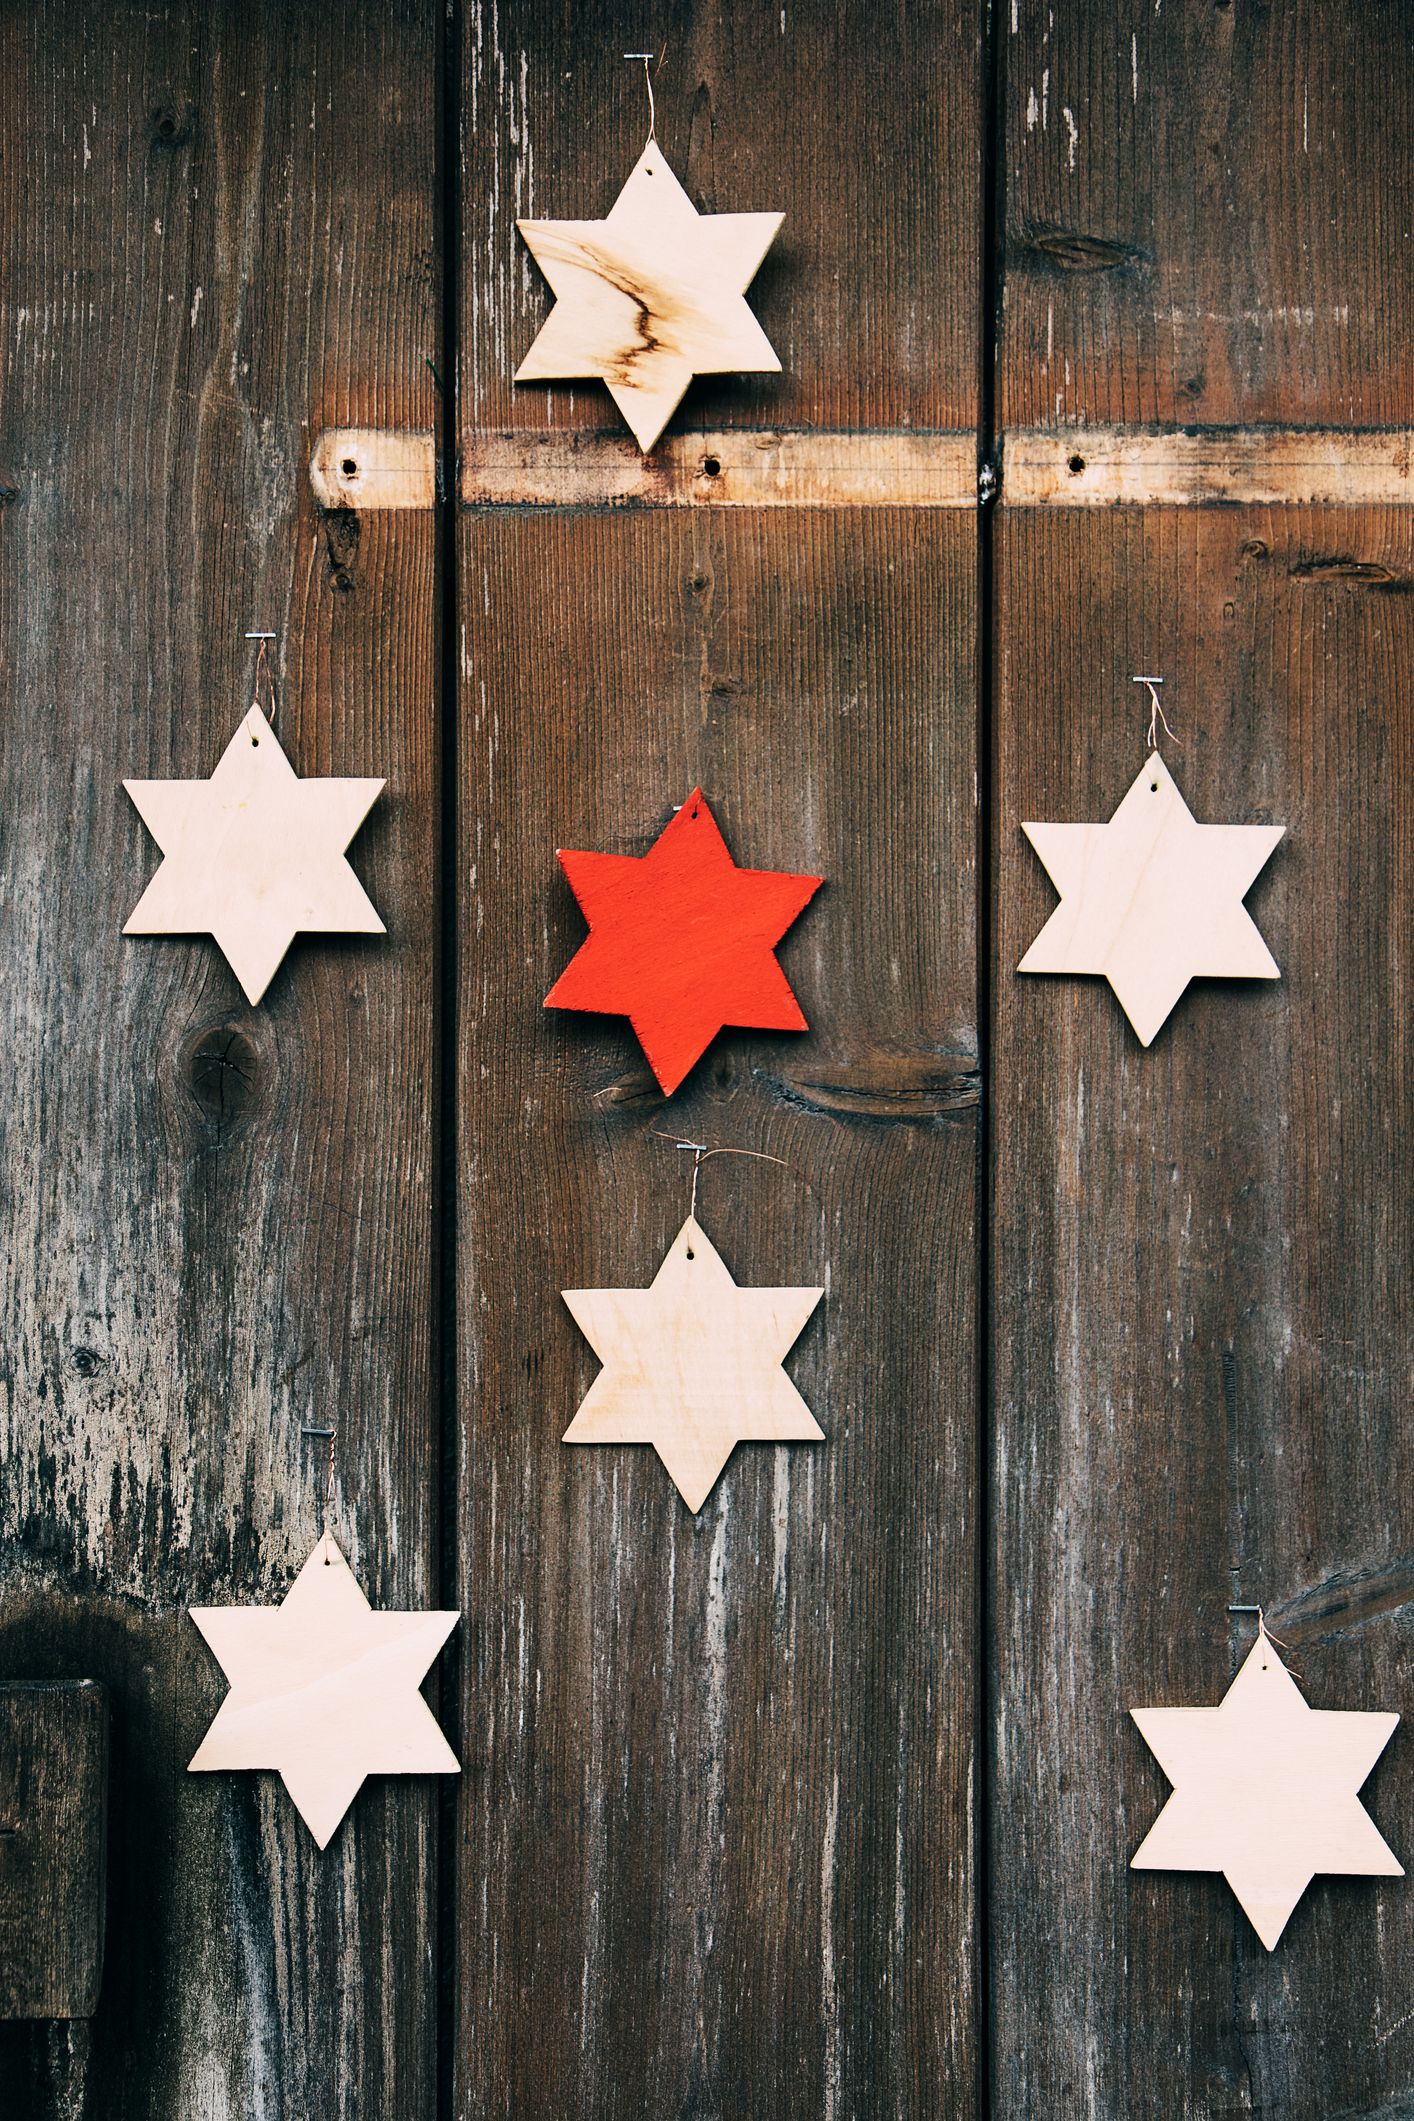 5x Star Christmas Colorful Wooden Door Decorations Hanging Party Decor Ornaments 